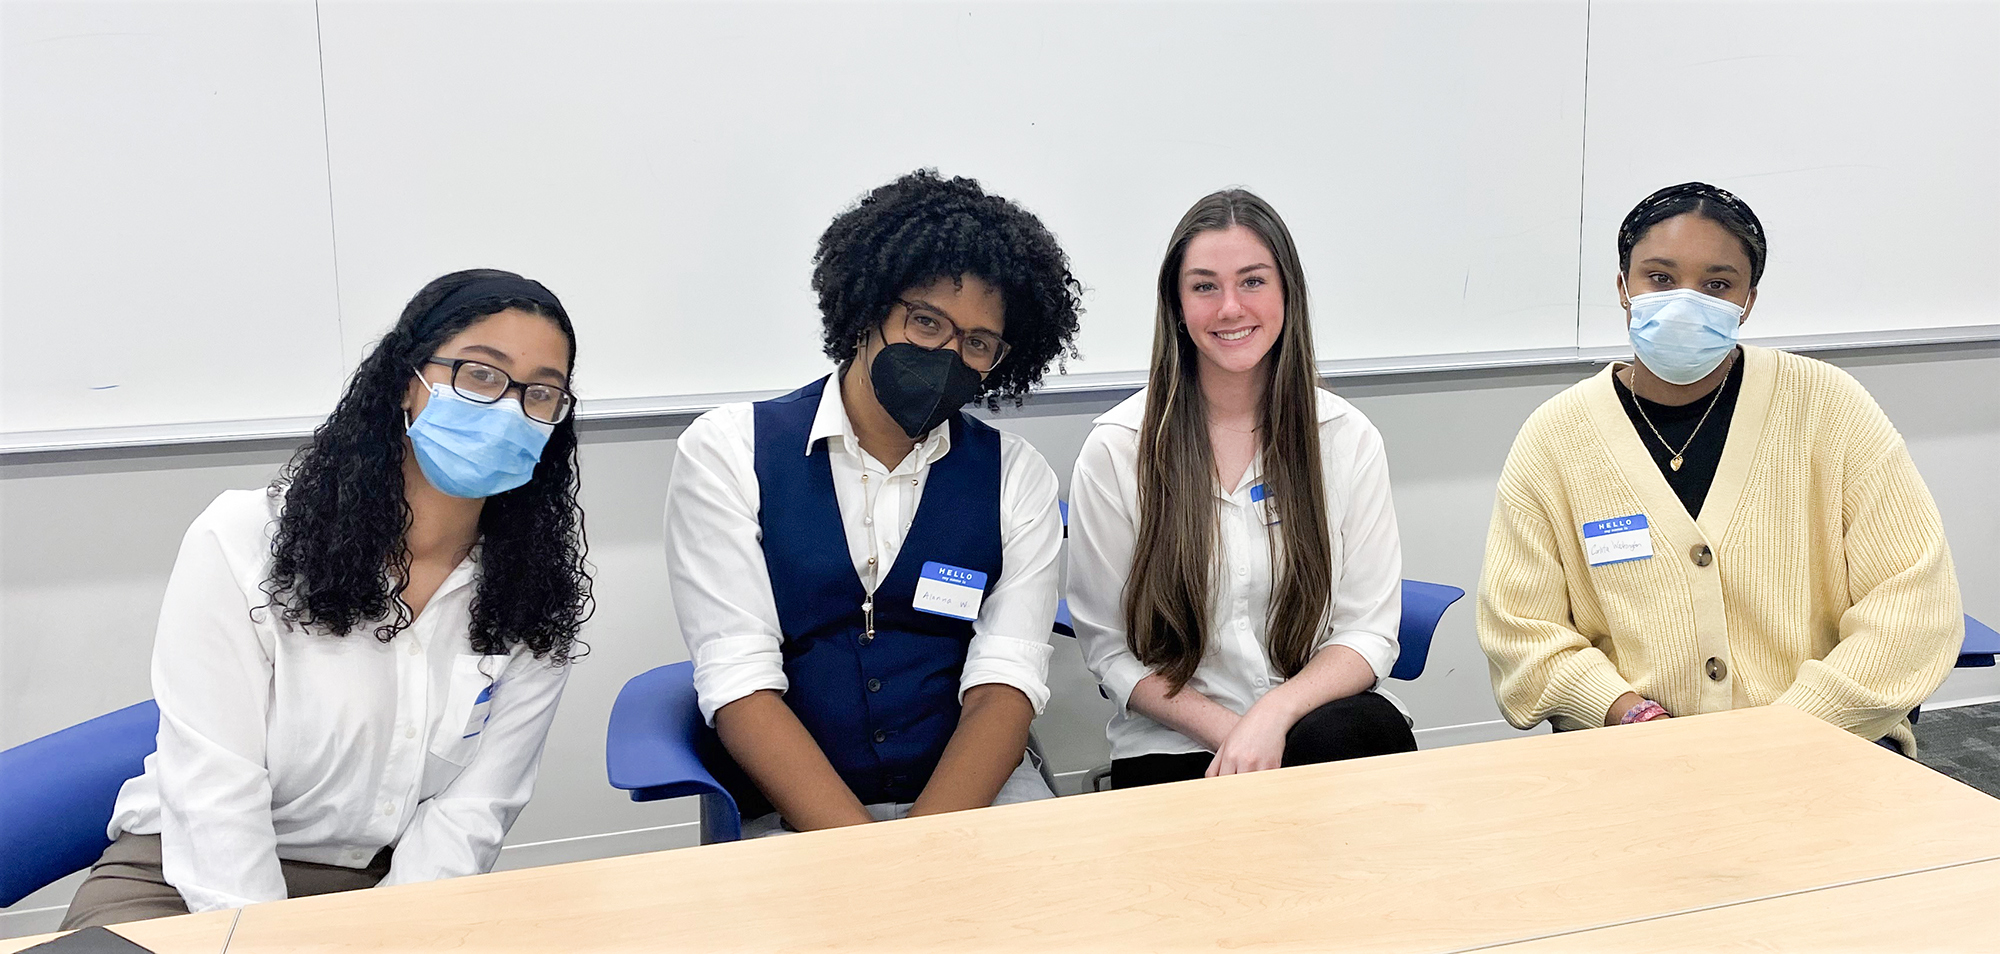 University of North Florida students spent the day volunteering to help clinic attendees.